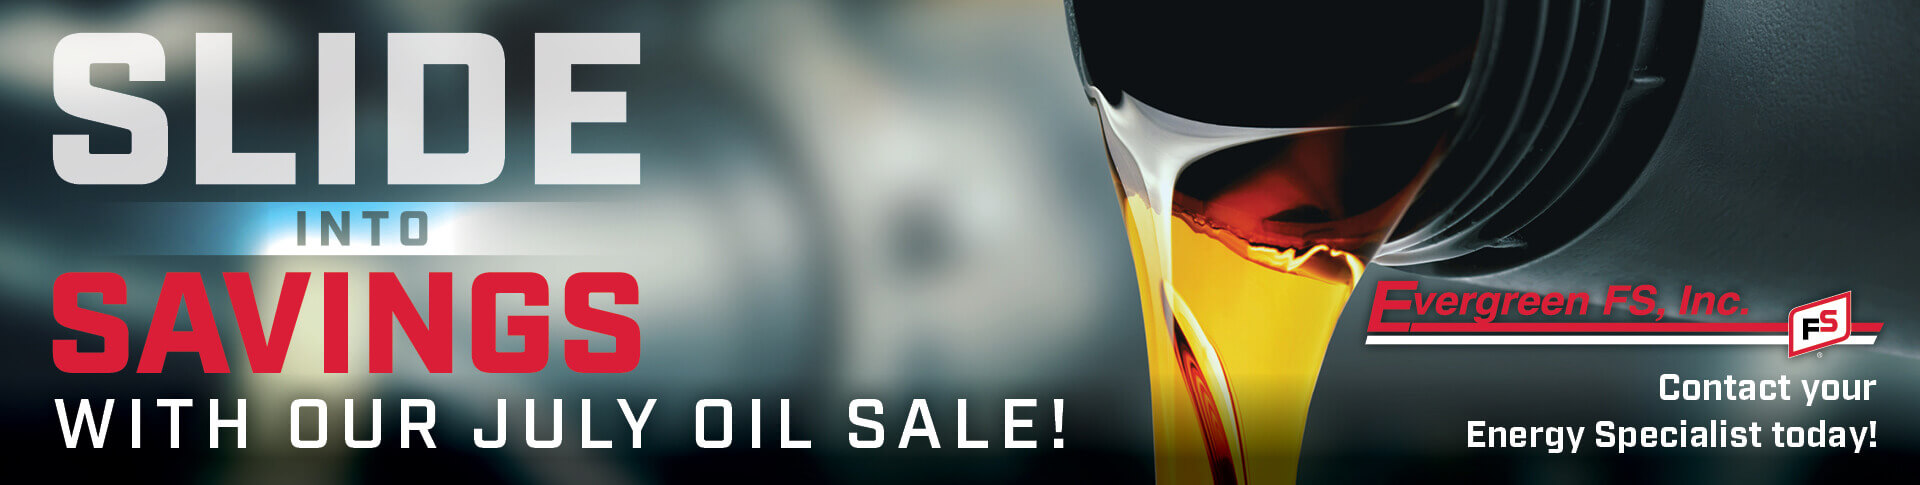 Oil-Sale-July-Evergreen-FS-lubricants-grease-DEF